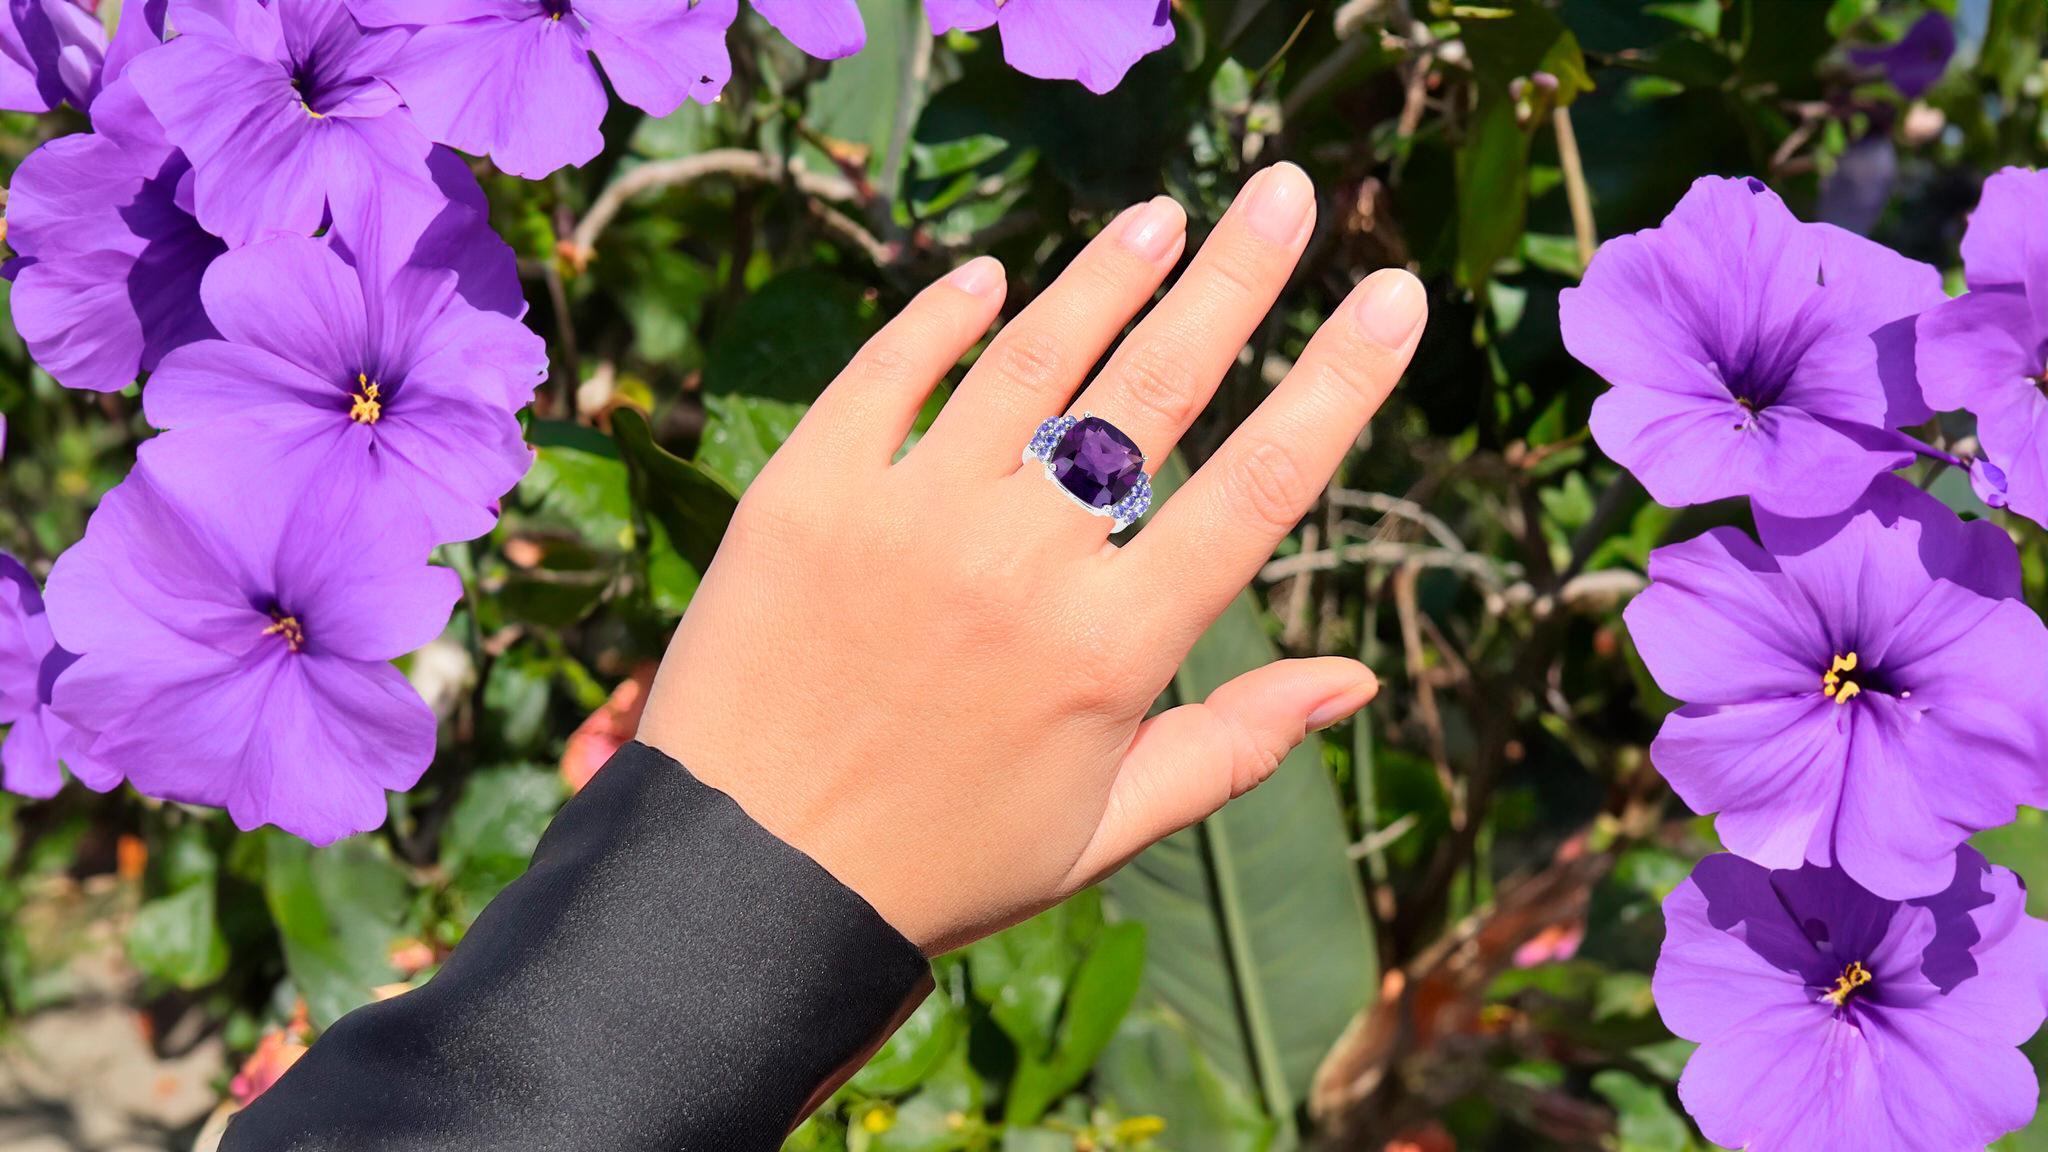 It comes with the Gemological Appraisal by GIA GG/AJP
All Gemstones are Natural
Amethyst = 5.85 Carats
14 Tanzanites = 0.50 Carats
Metal: Rhodium Plated Sterling Silver
Ring Size: 7* US
*It can be resized complimentary